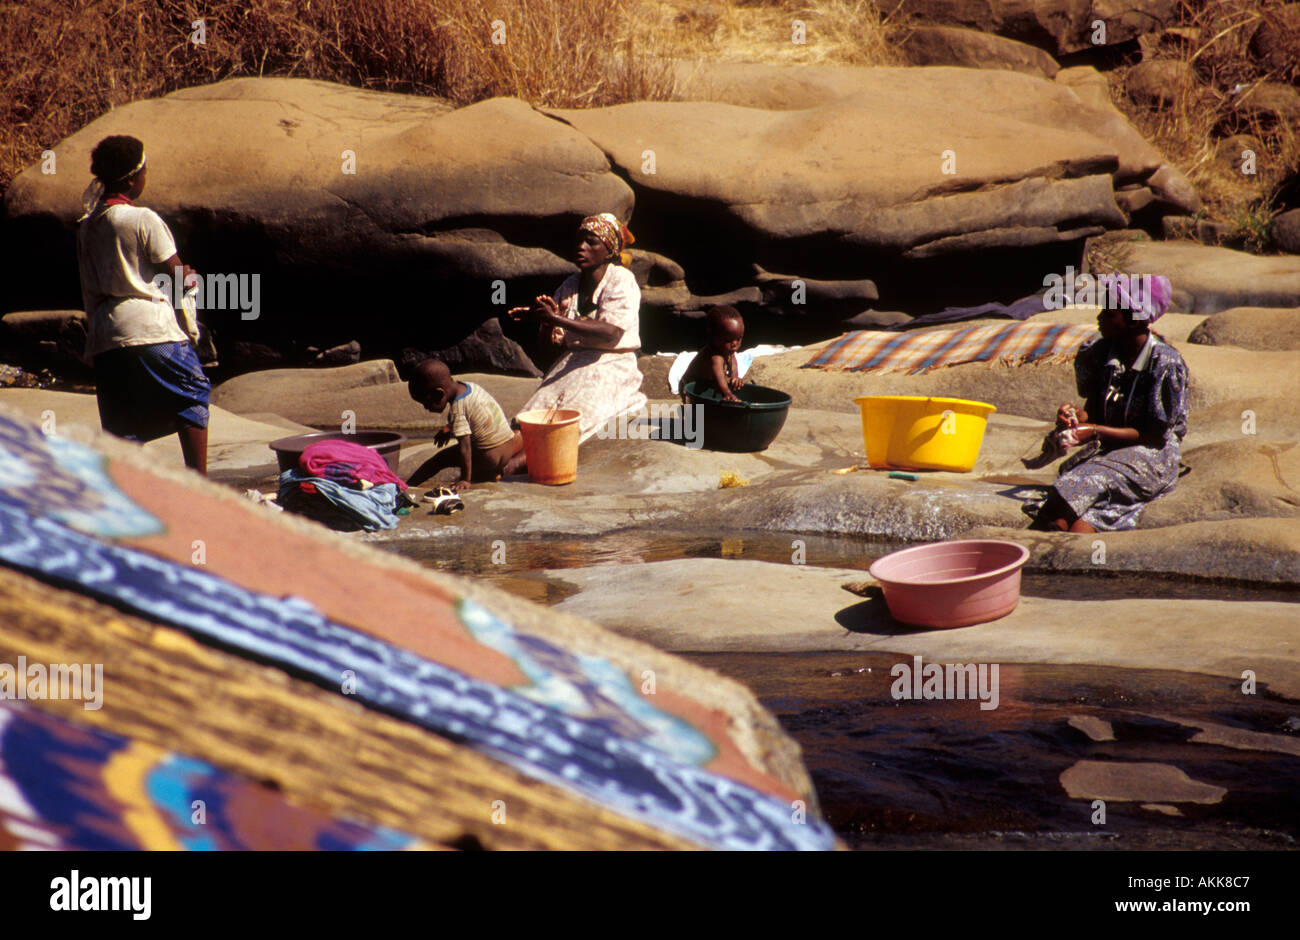 Scenic landscape of women washing clothes outdoors South Africa Stock Photo